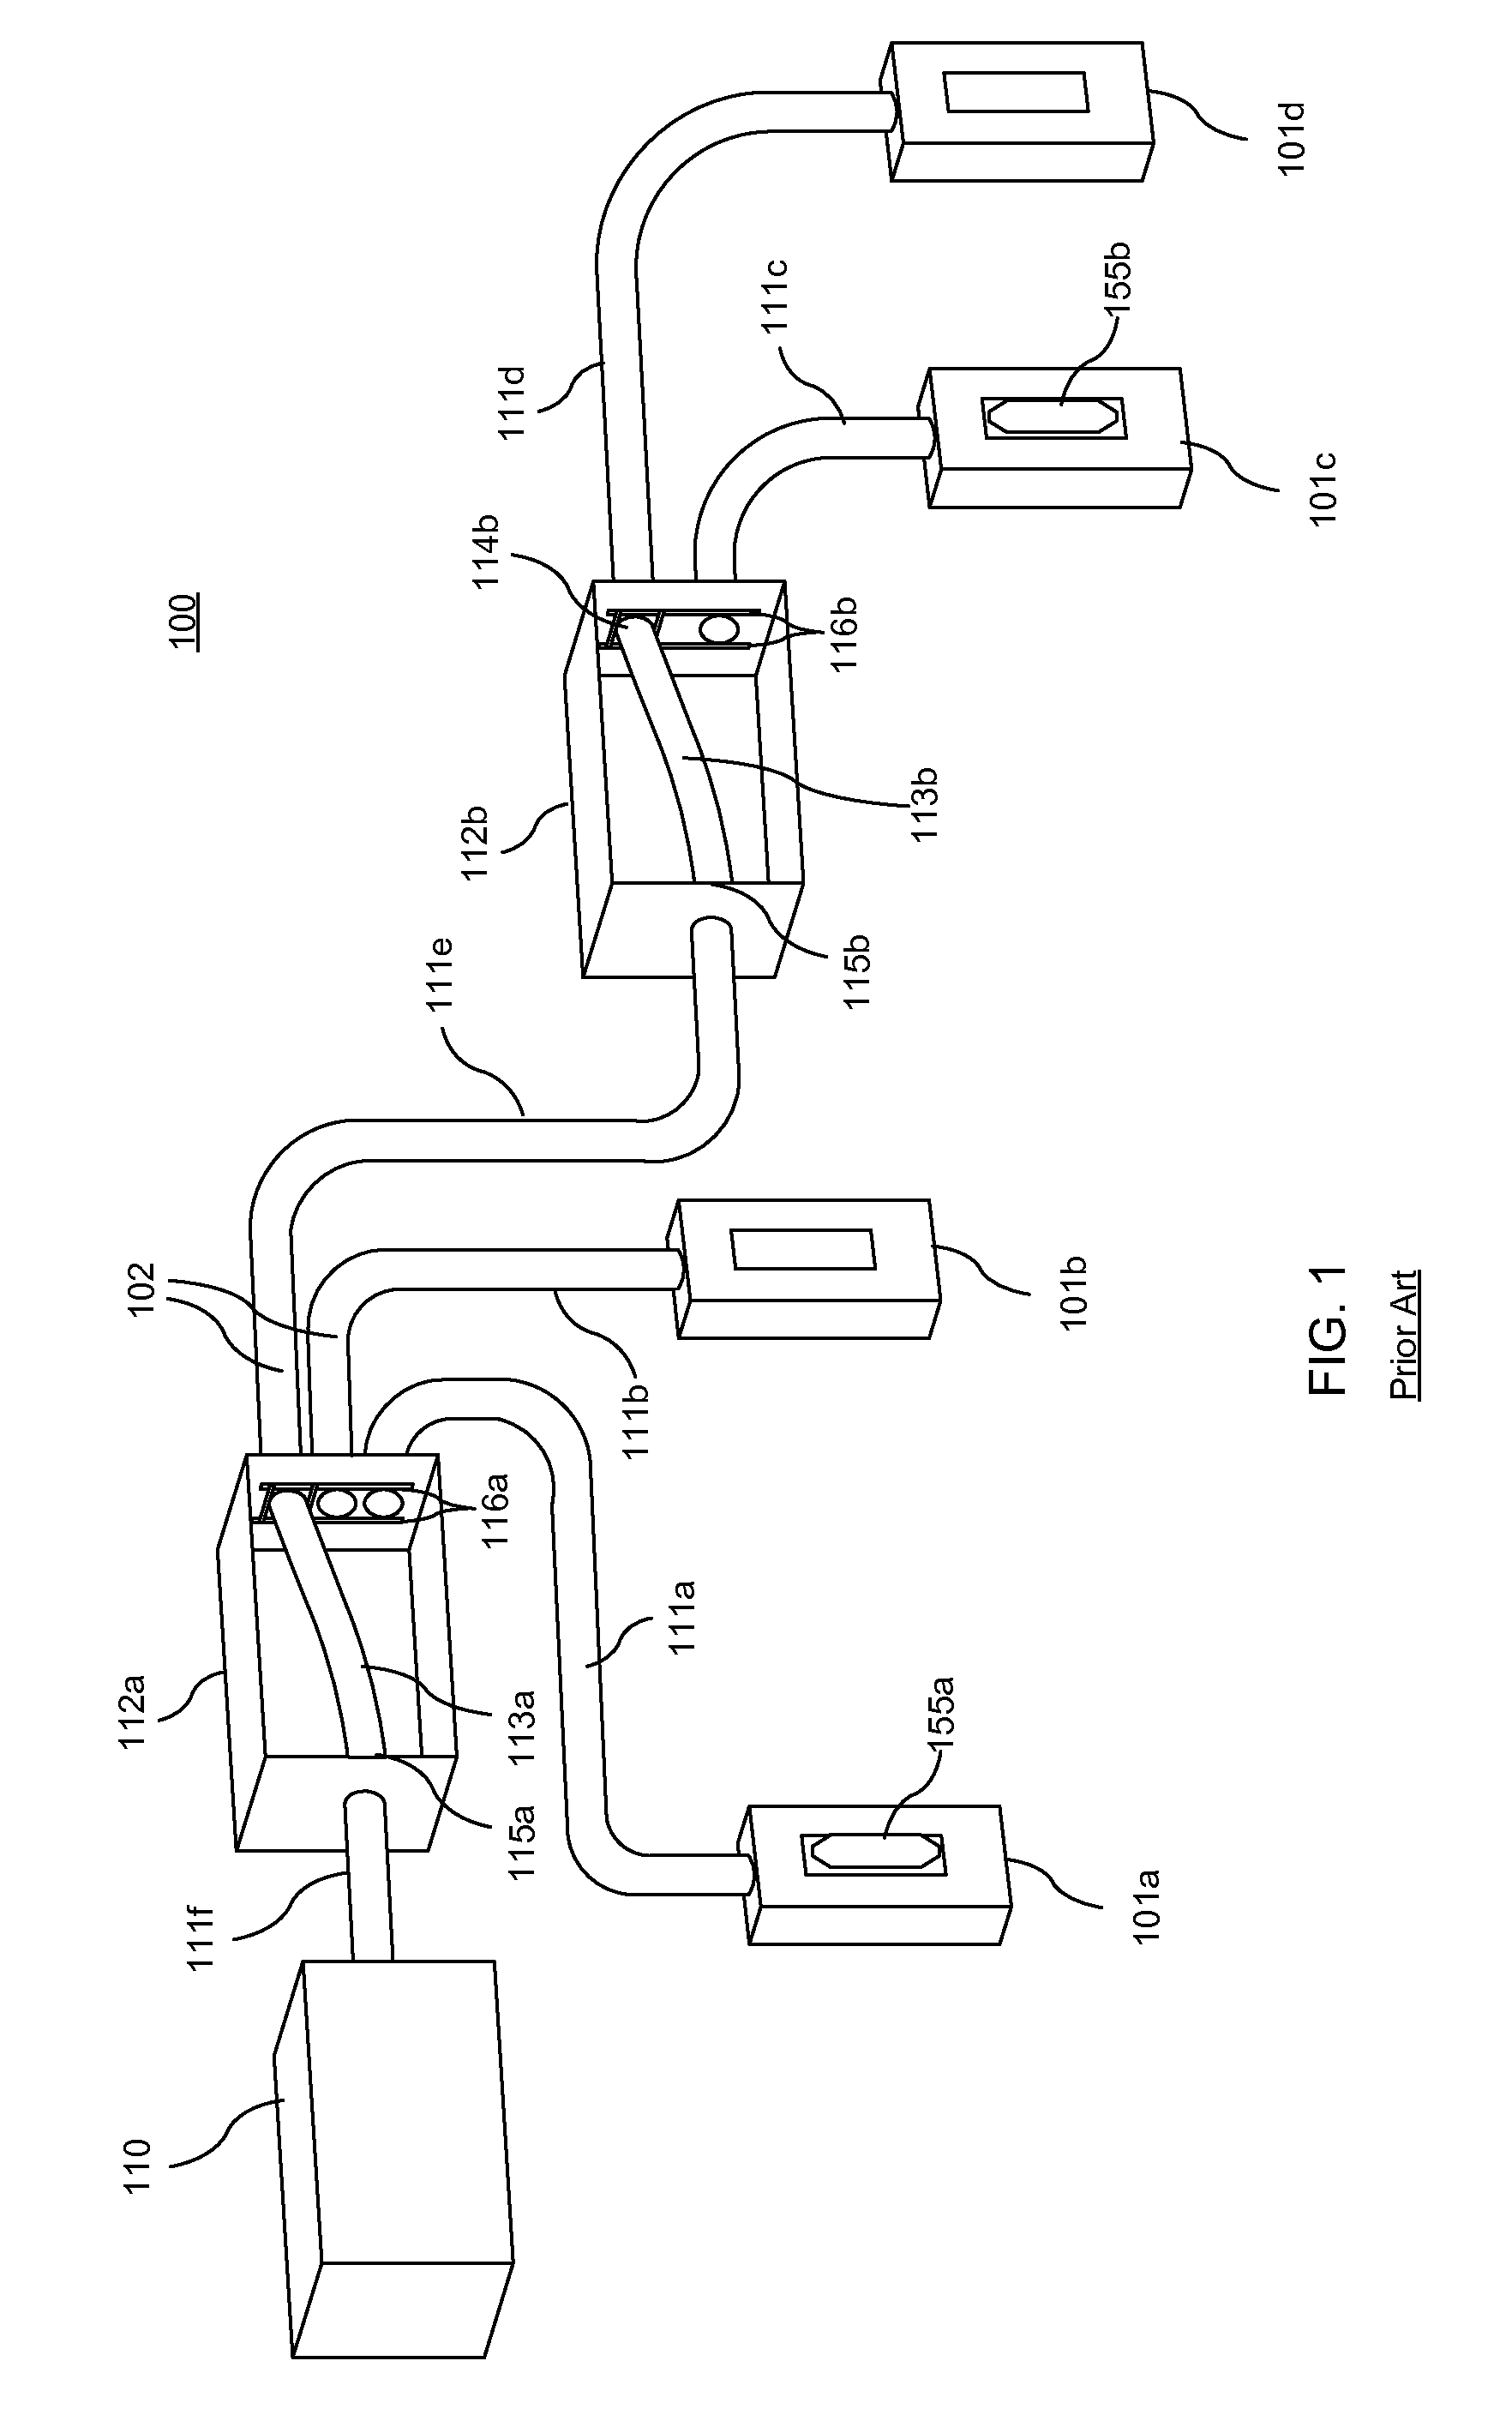 Pneumatic tube carrier system and method